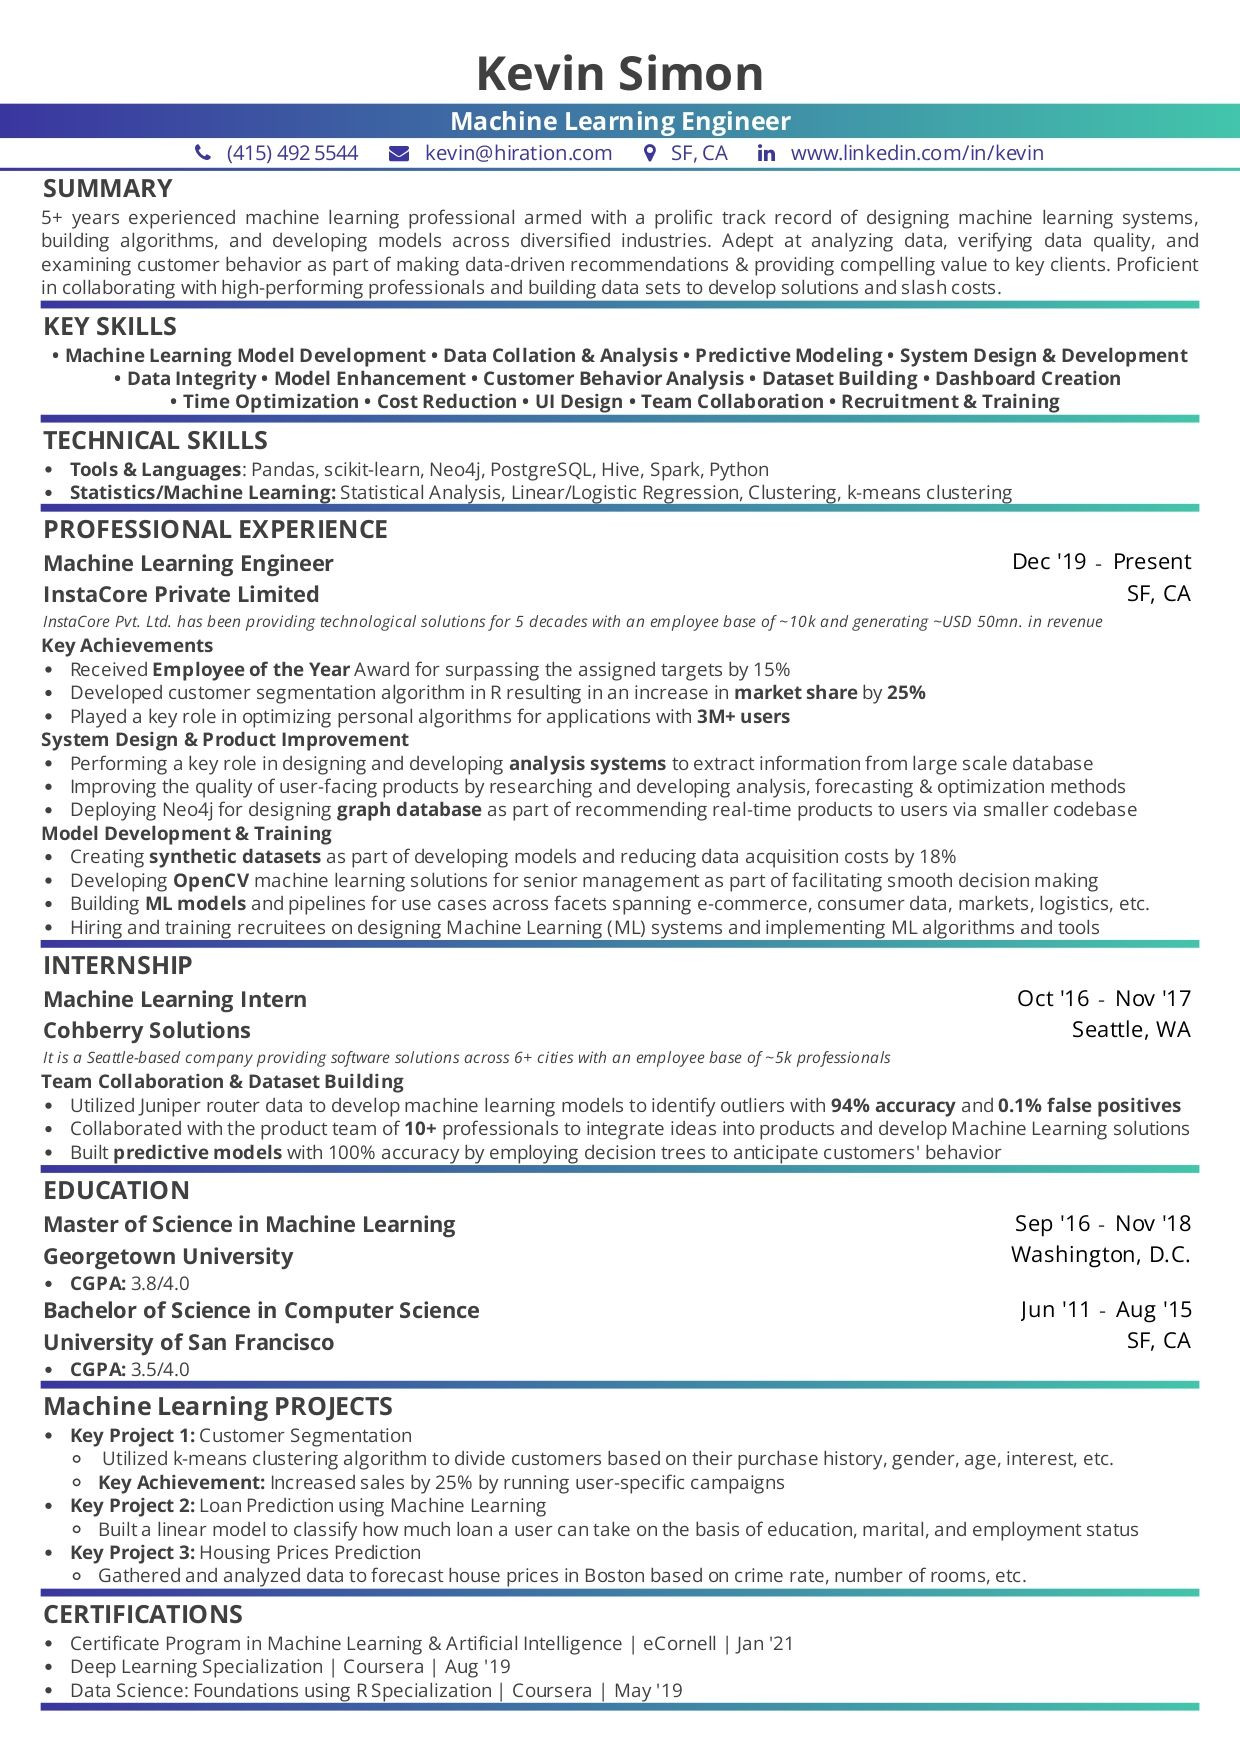 Sample Resumes for Machine Learnign Jobs How to Write A Machine Learning Resume: 2022 Guide with 10lancarrezekiq Examples